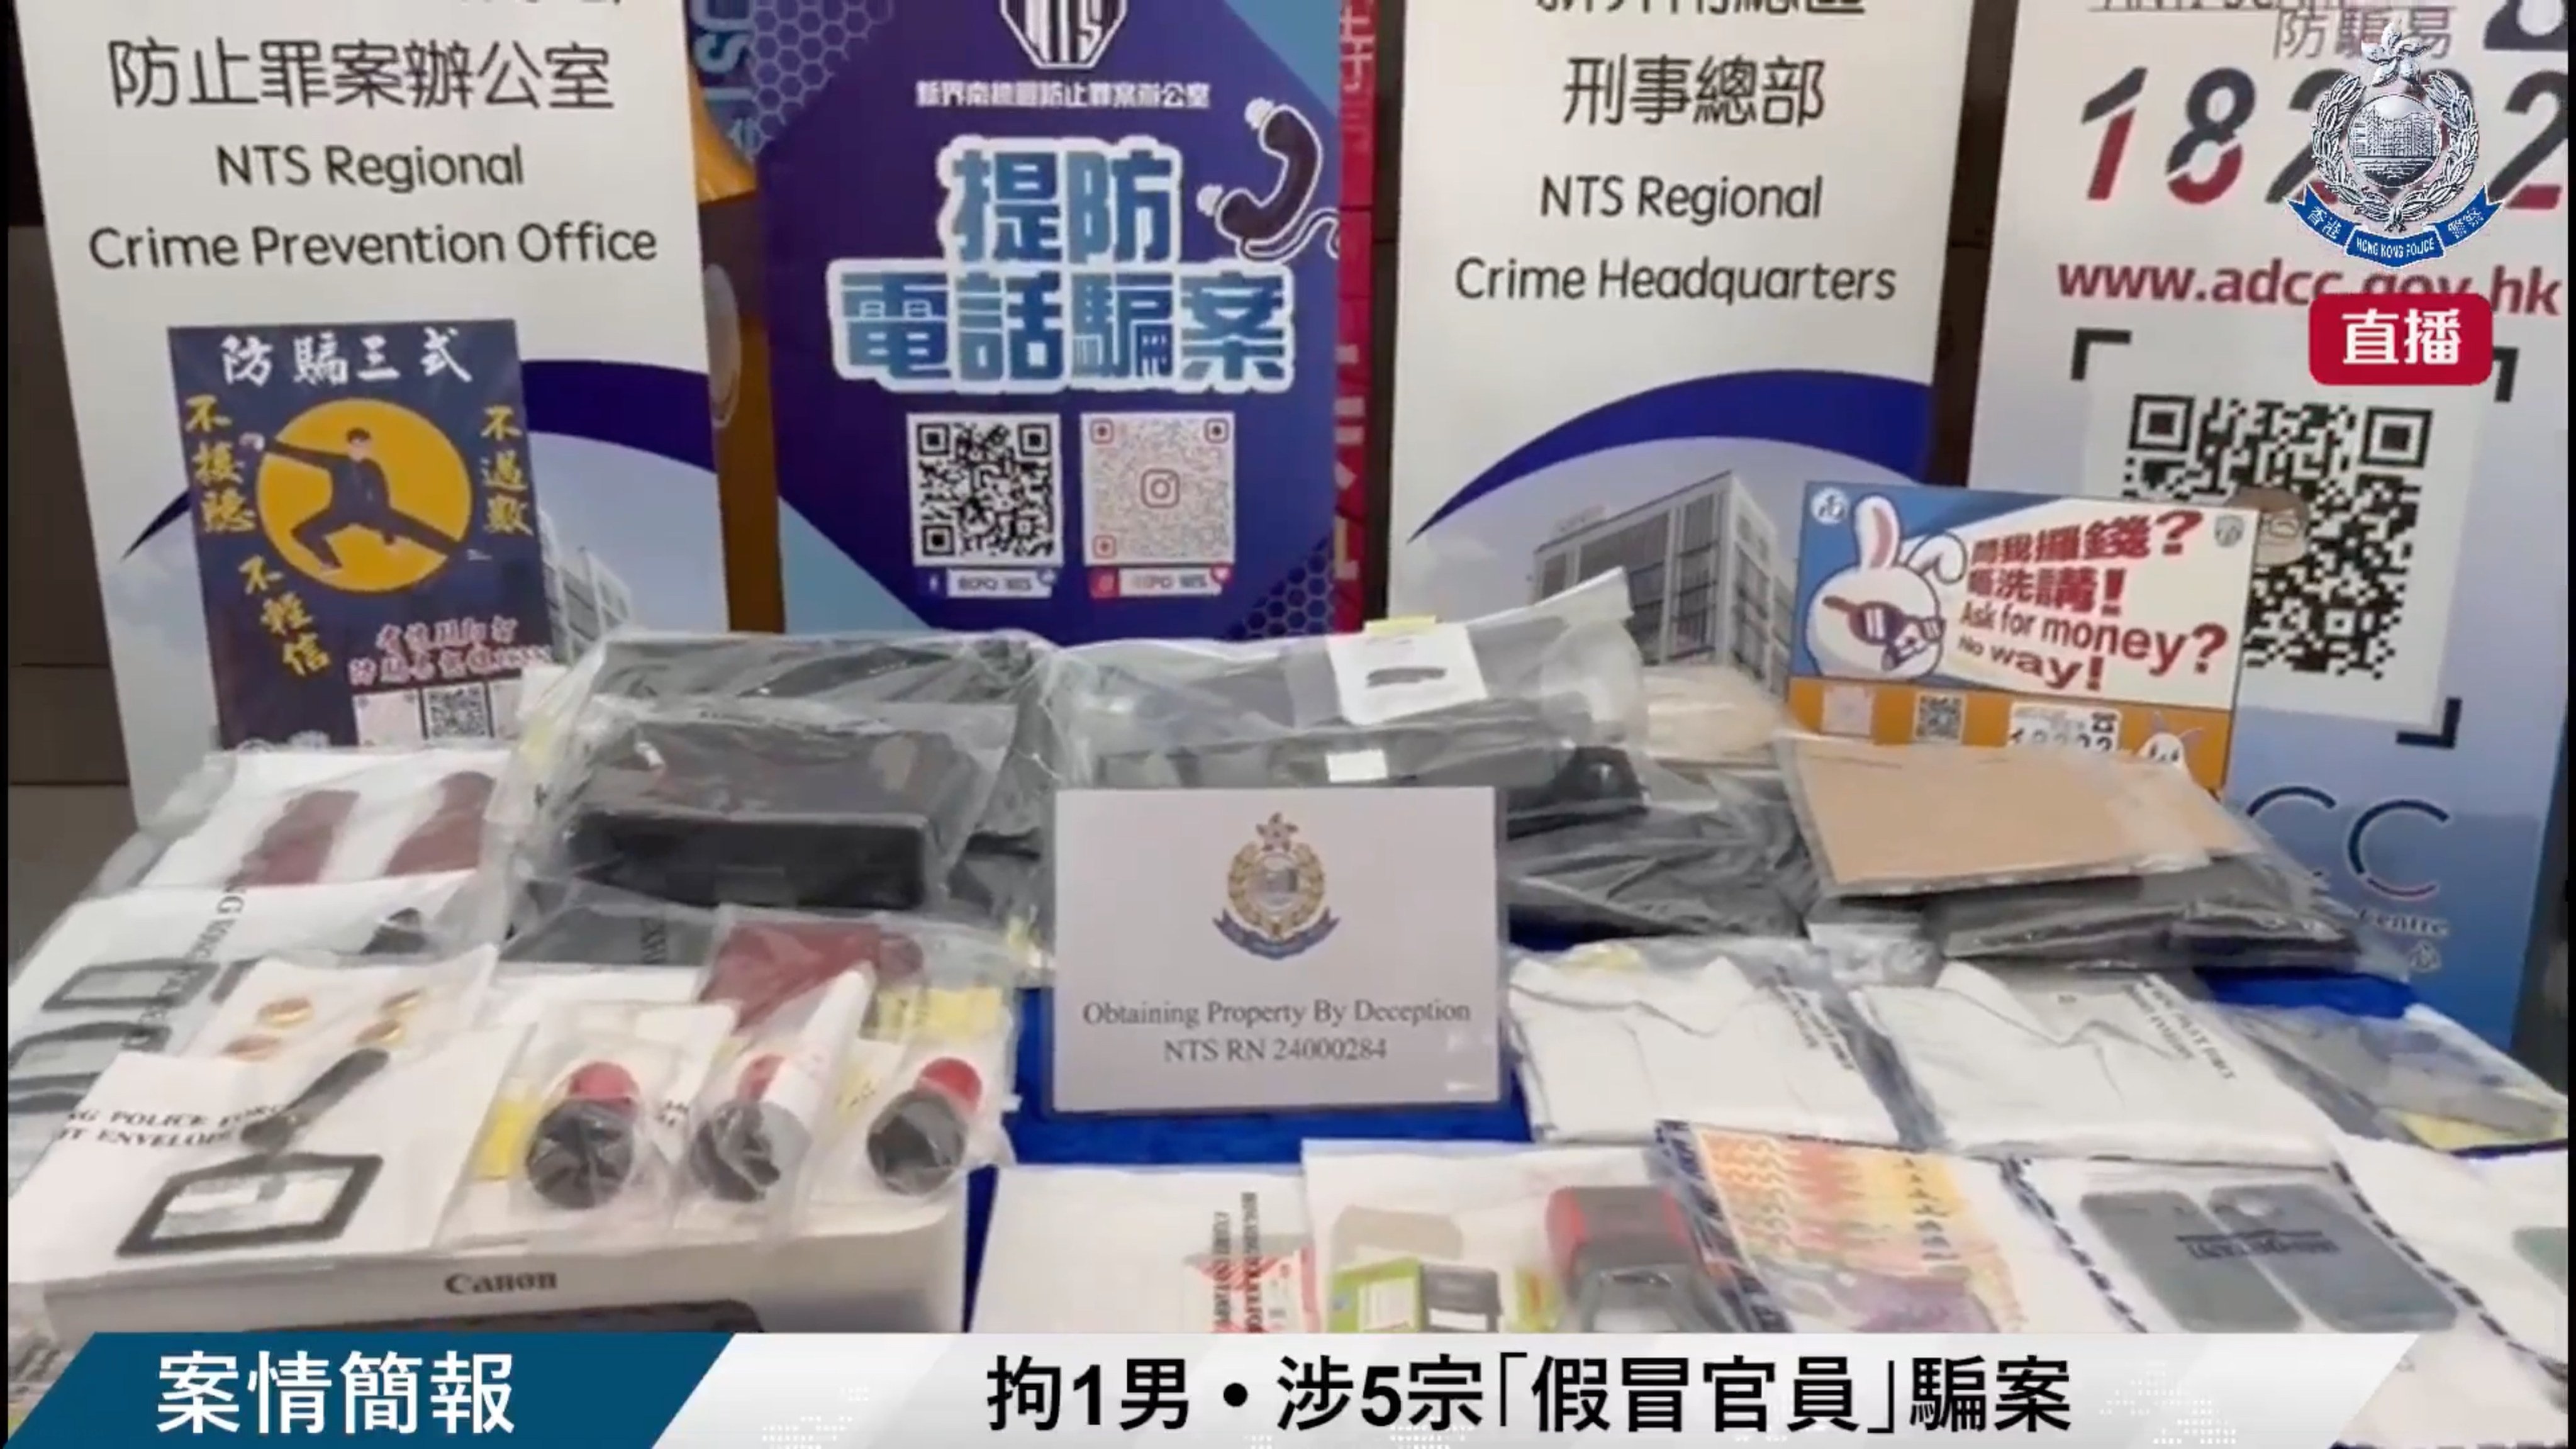 Evidence seized during the arrest. Photo: SCMP